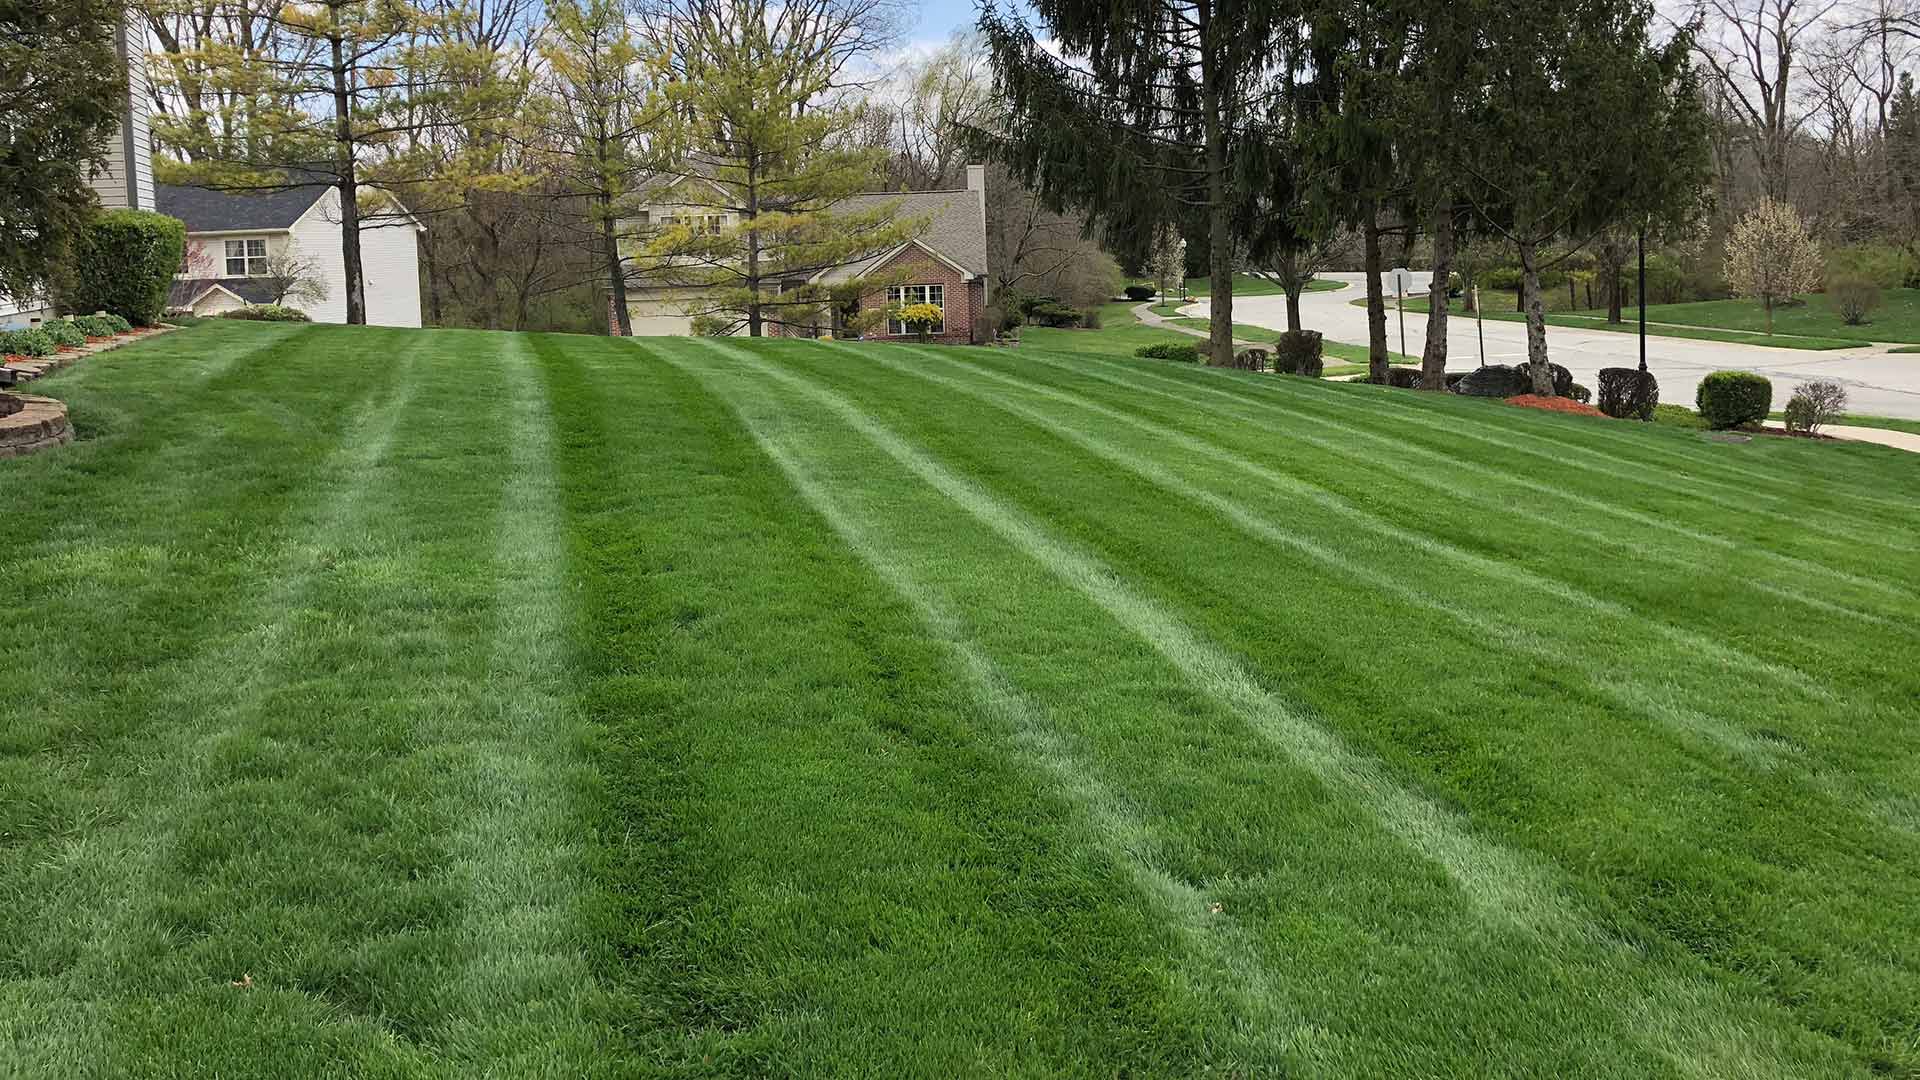 3 Mistakes You’re Probably Making When Mowing Your Lawn